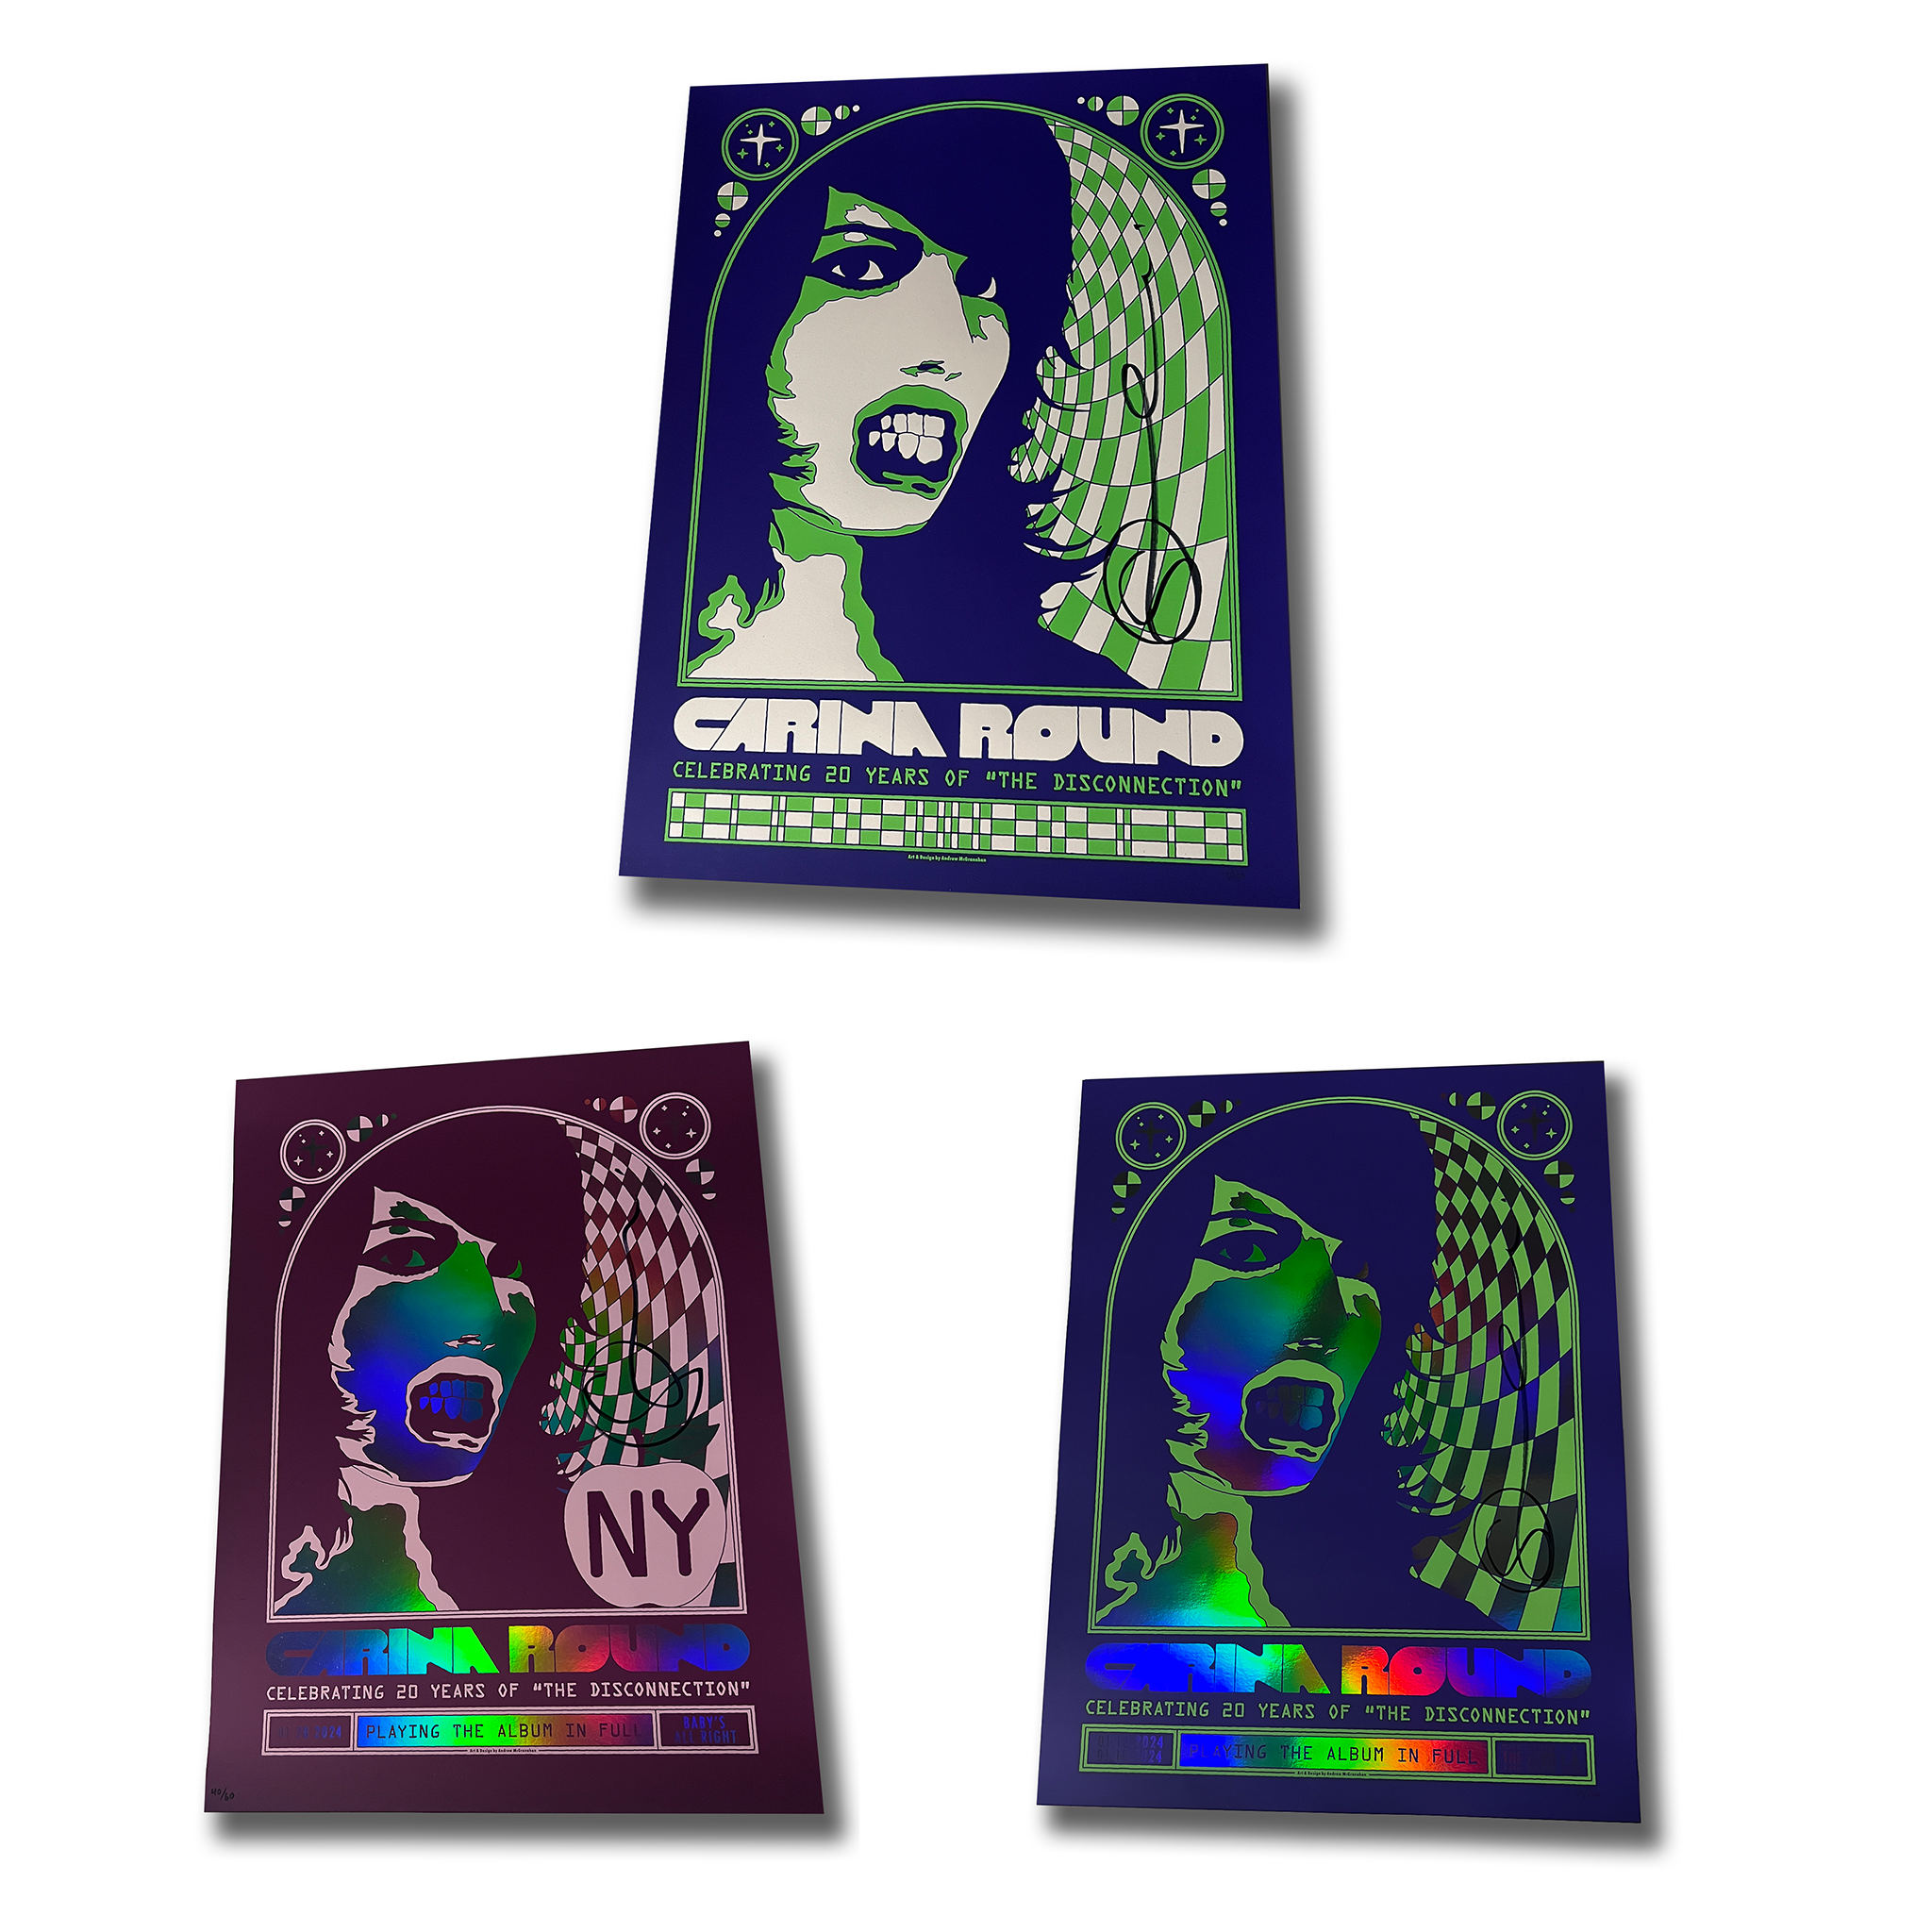 Carina Round 18x24 Limited Edition AUTOGRAPHED Silk Screen Posters and FOILS!